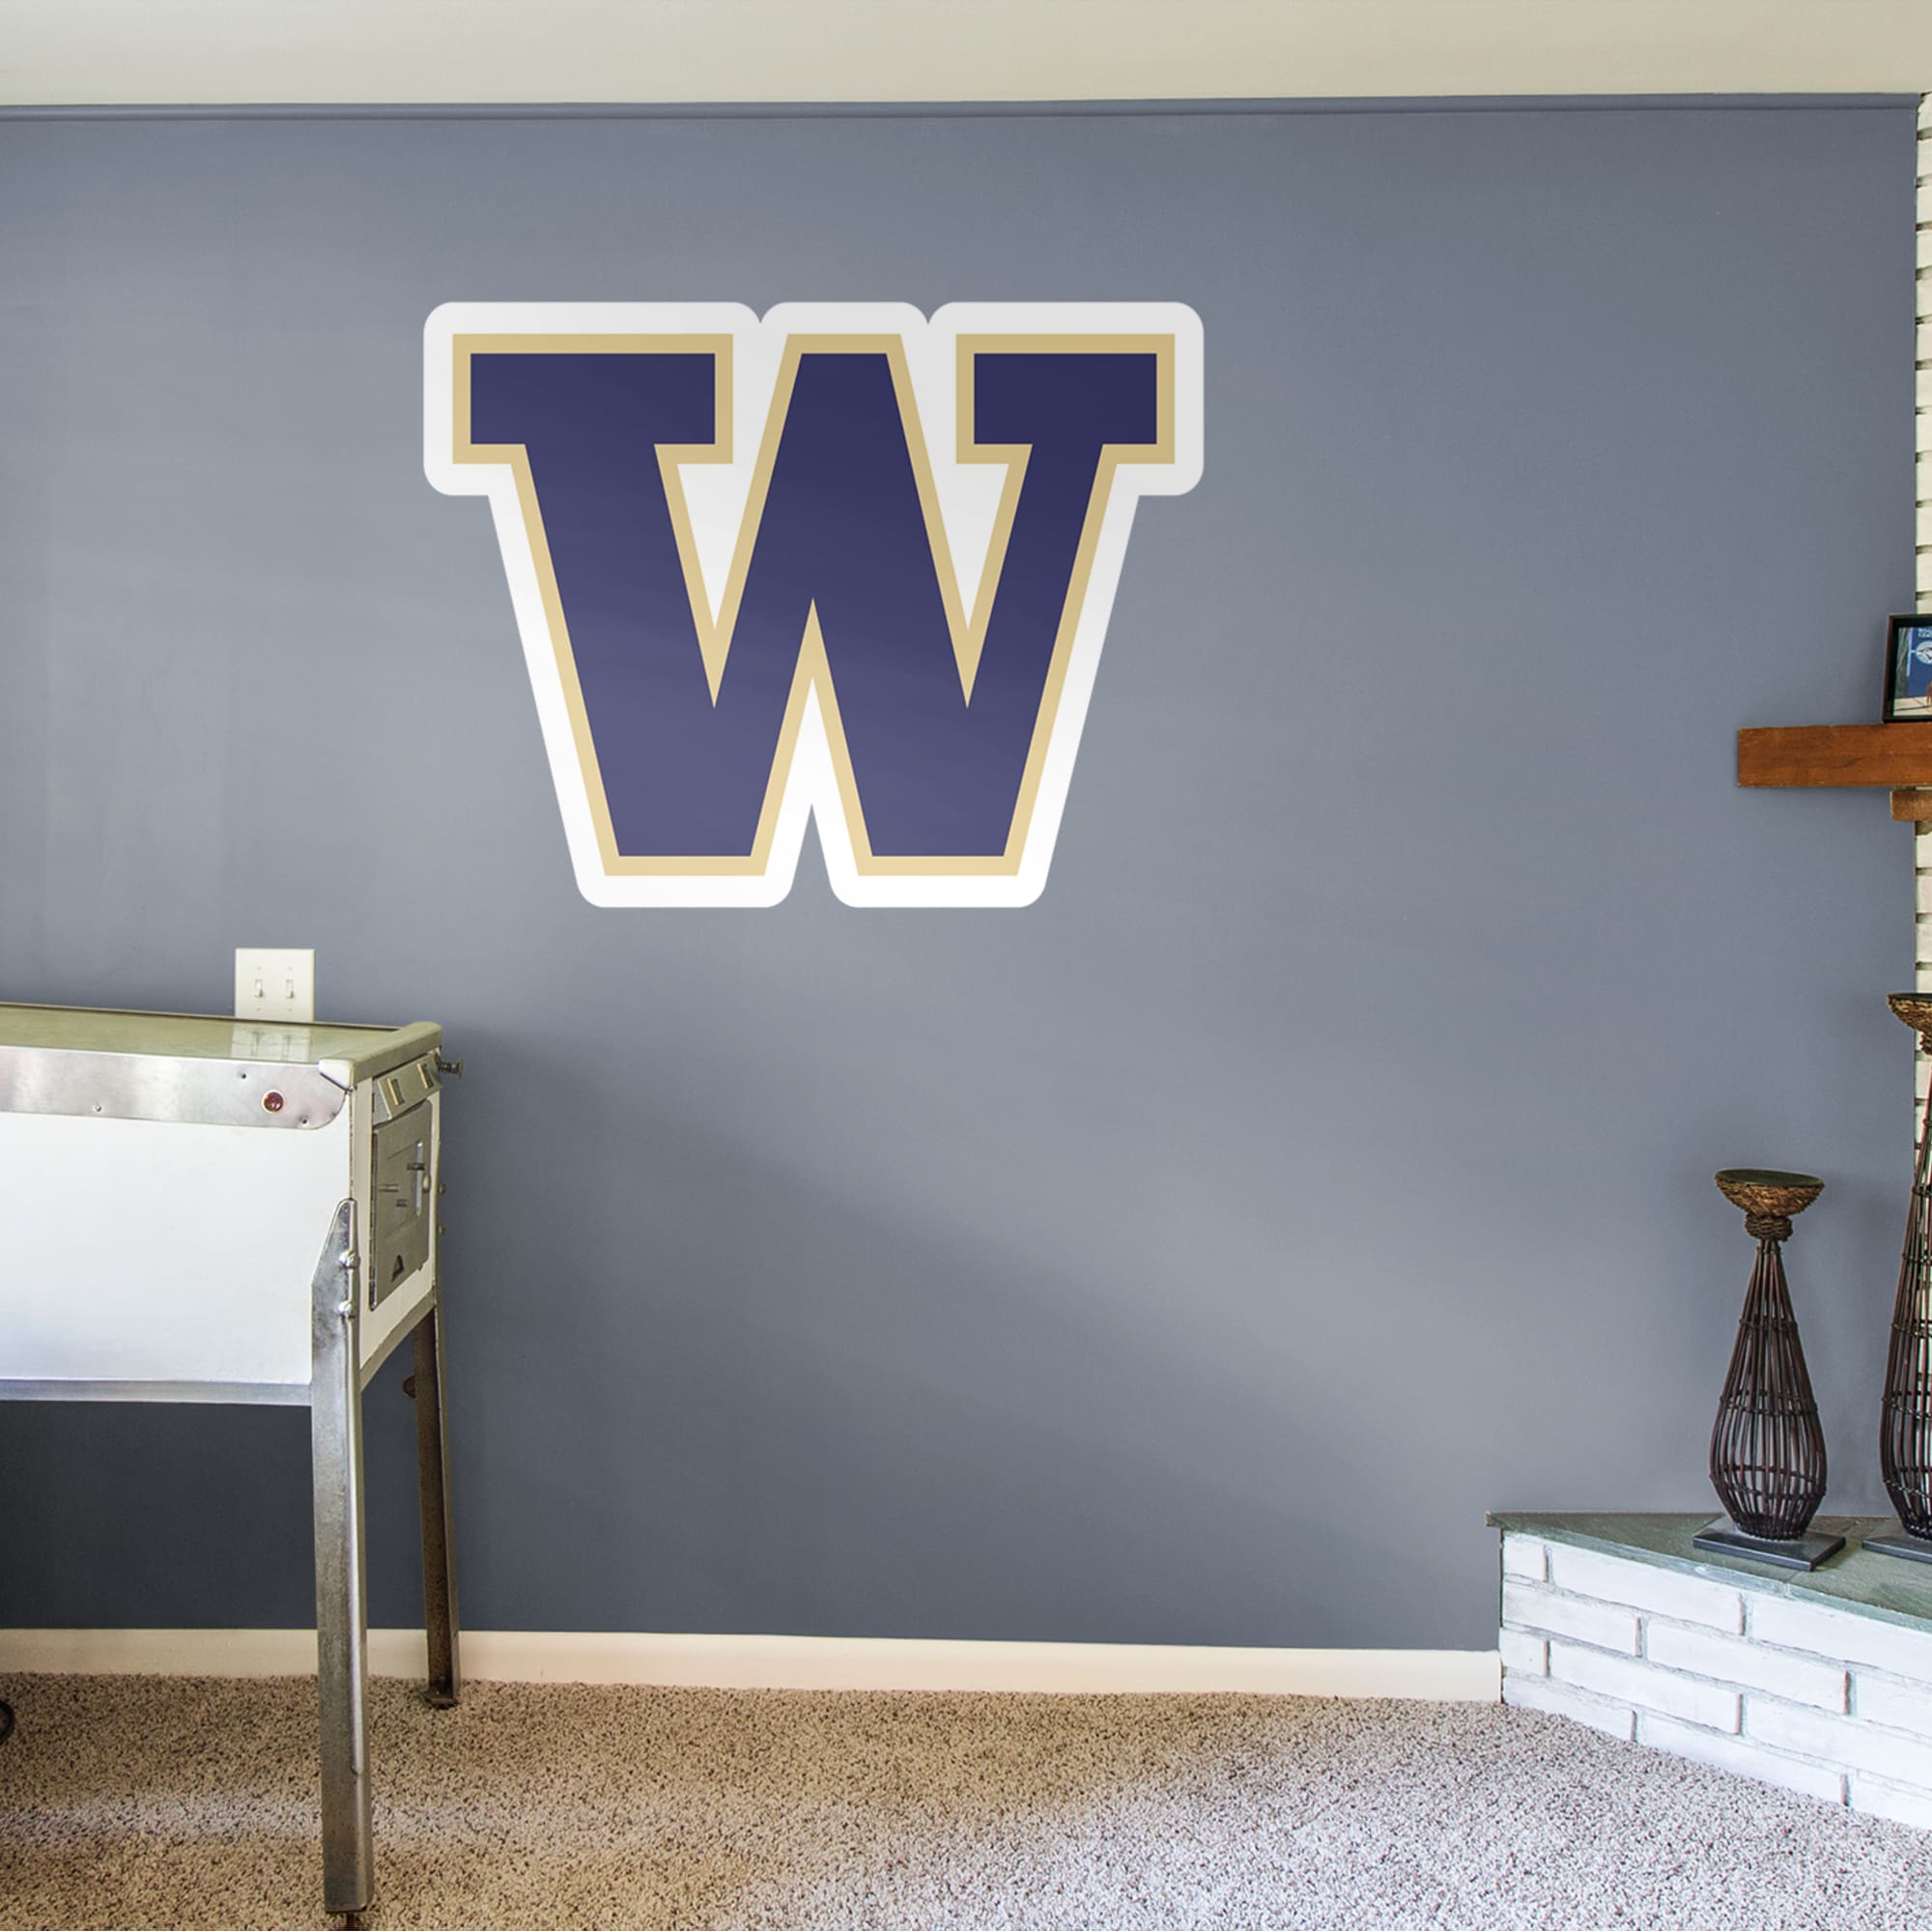 Washington Huskies: Logo - Officially Licensed Removable Wall Decal 44.0"W x 34.0"H by Fathead | Vinyl